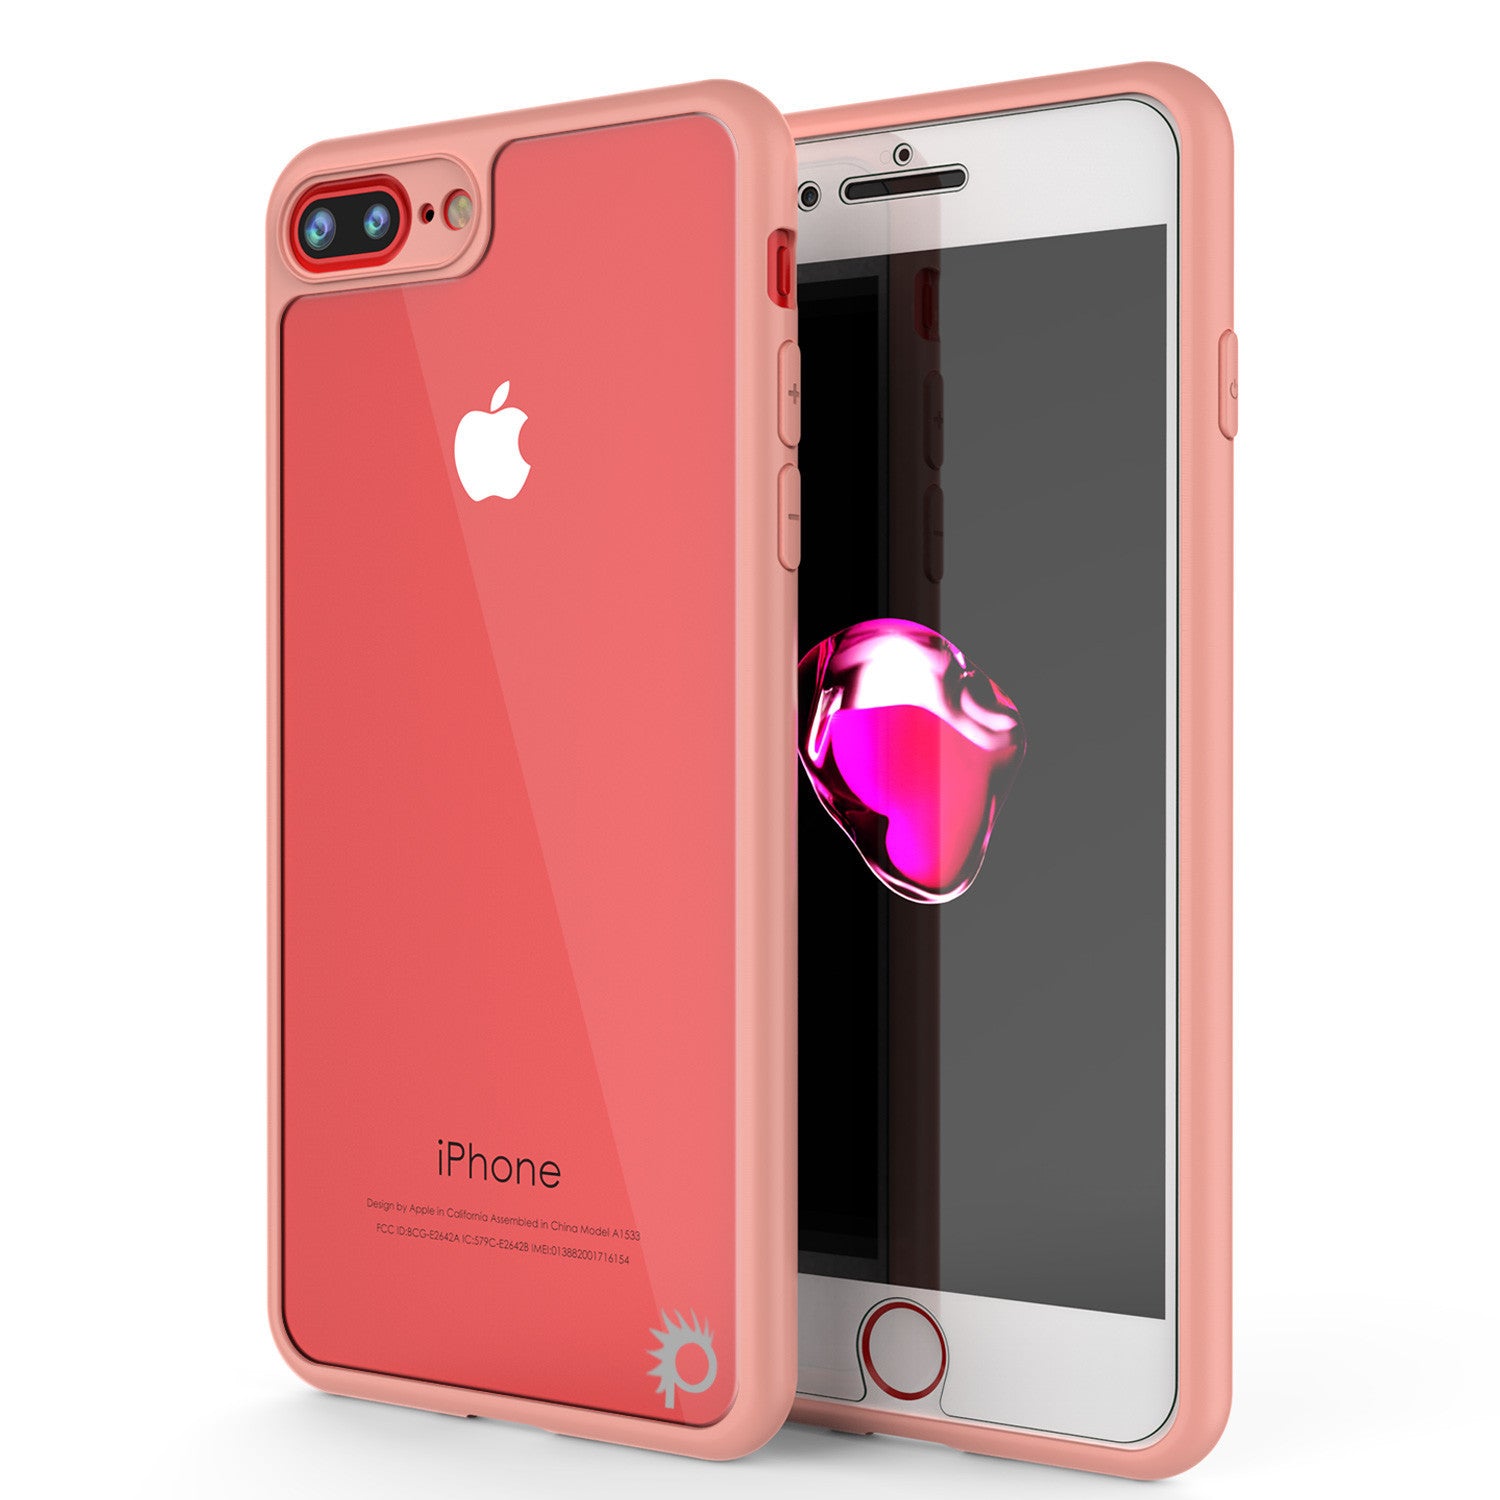 iPhone 7 PLUS Case [MASK Series] [PINK] Full Body Hybrid Dual Layer TPU Cover W/ protective Tempered Glass Screen Protector (Color in image: rose)